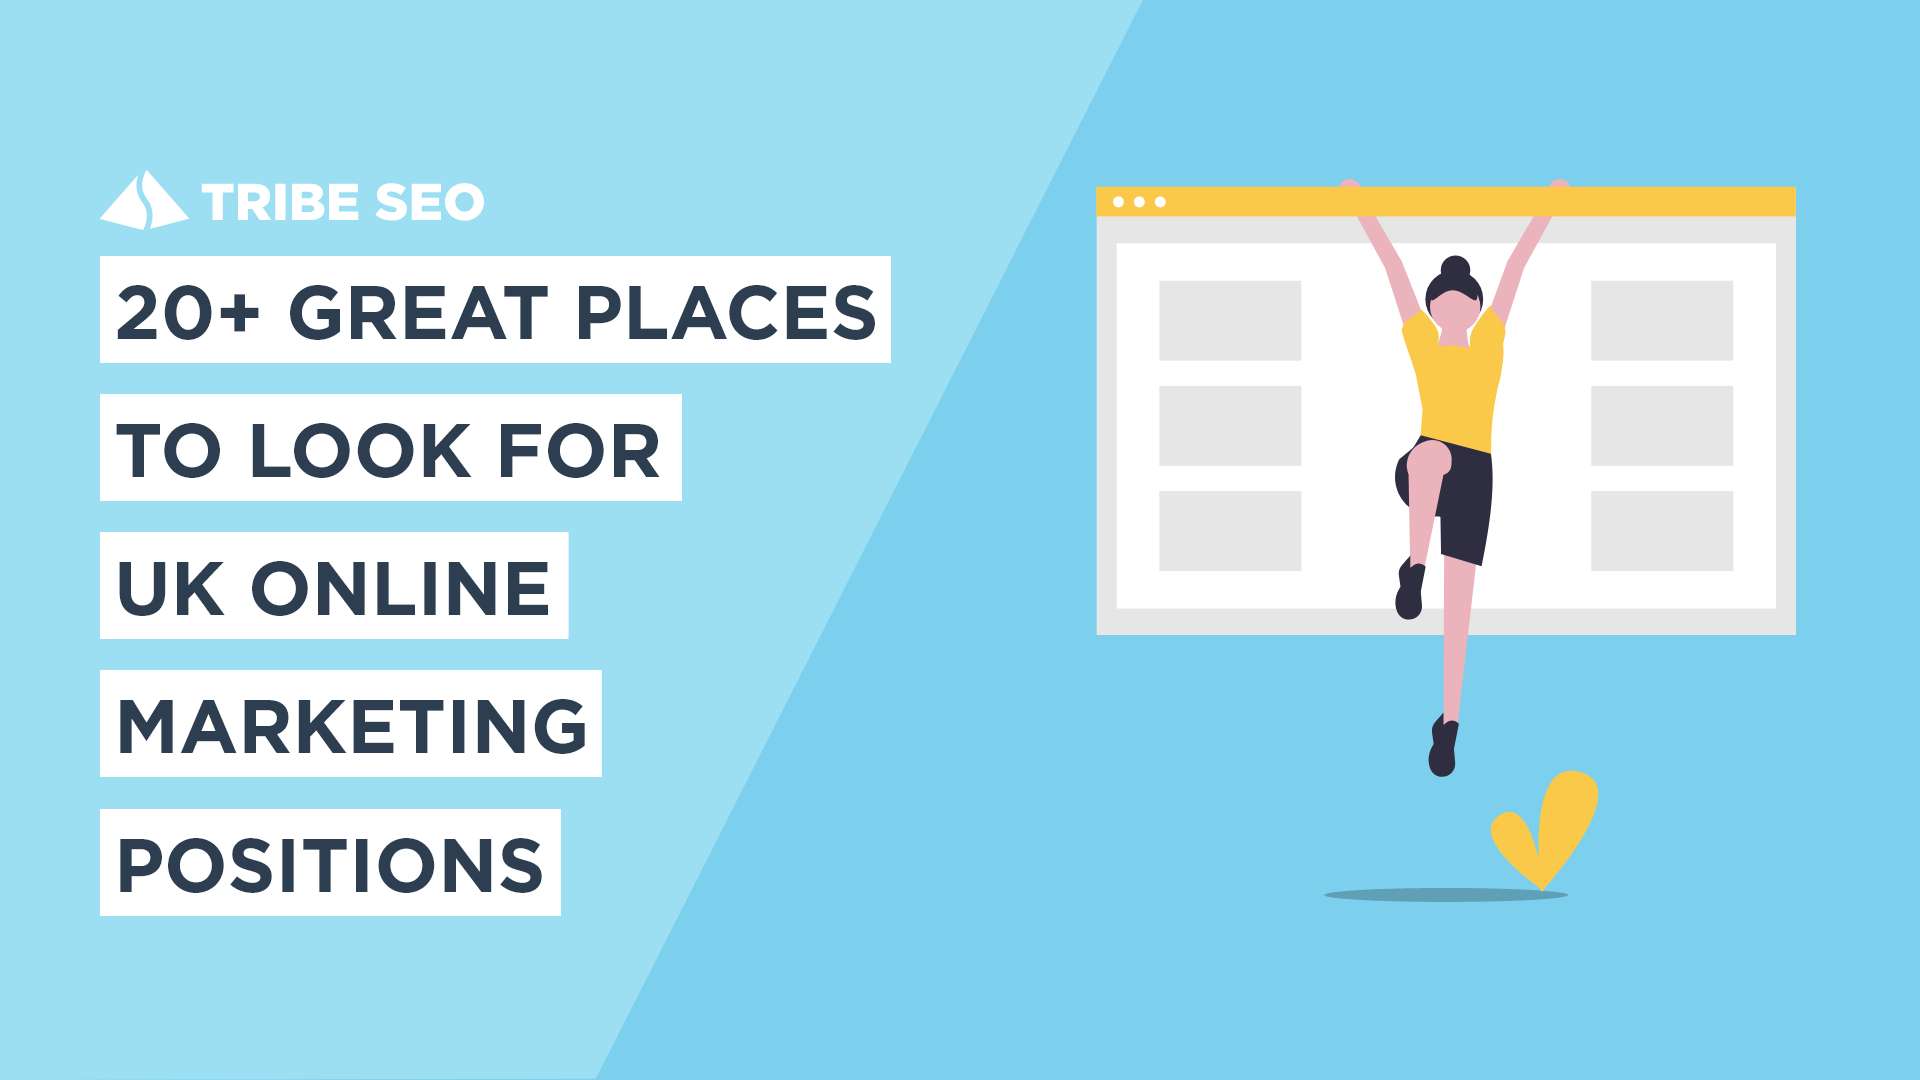 20+ Great Places to Look for UK Online Marketing Positions